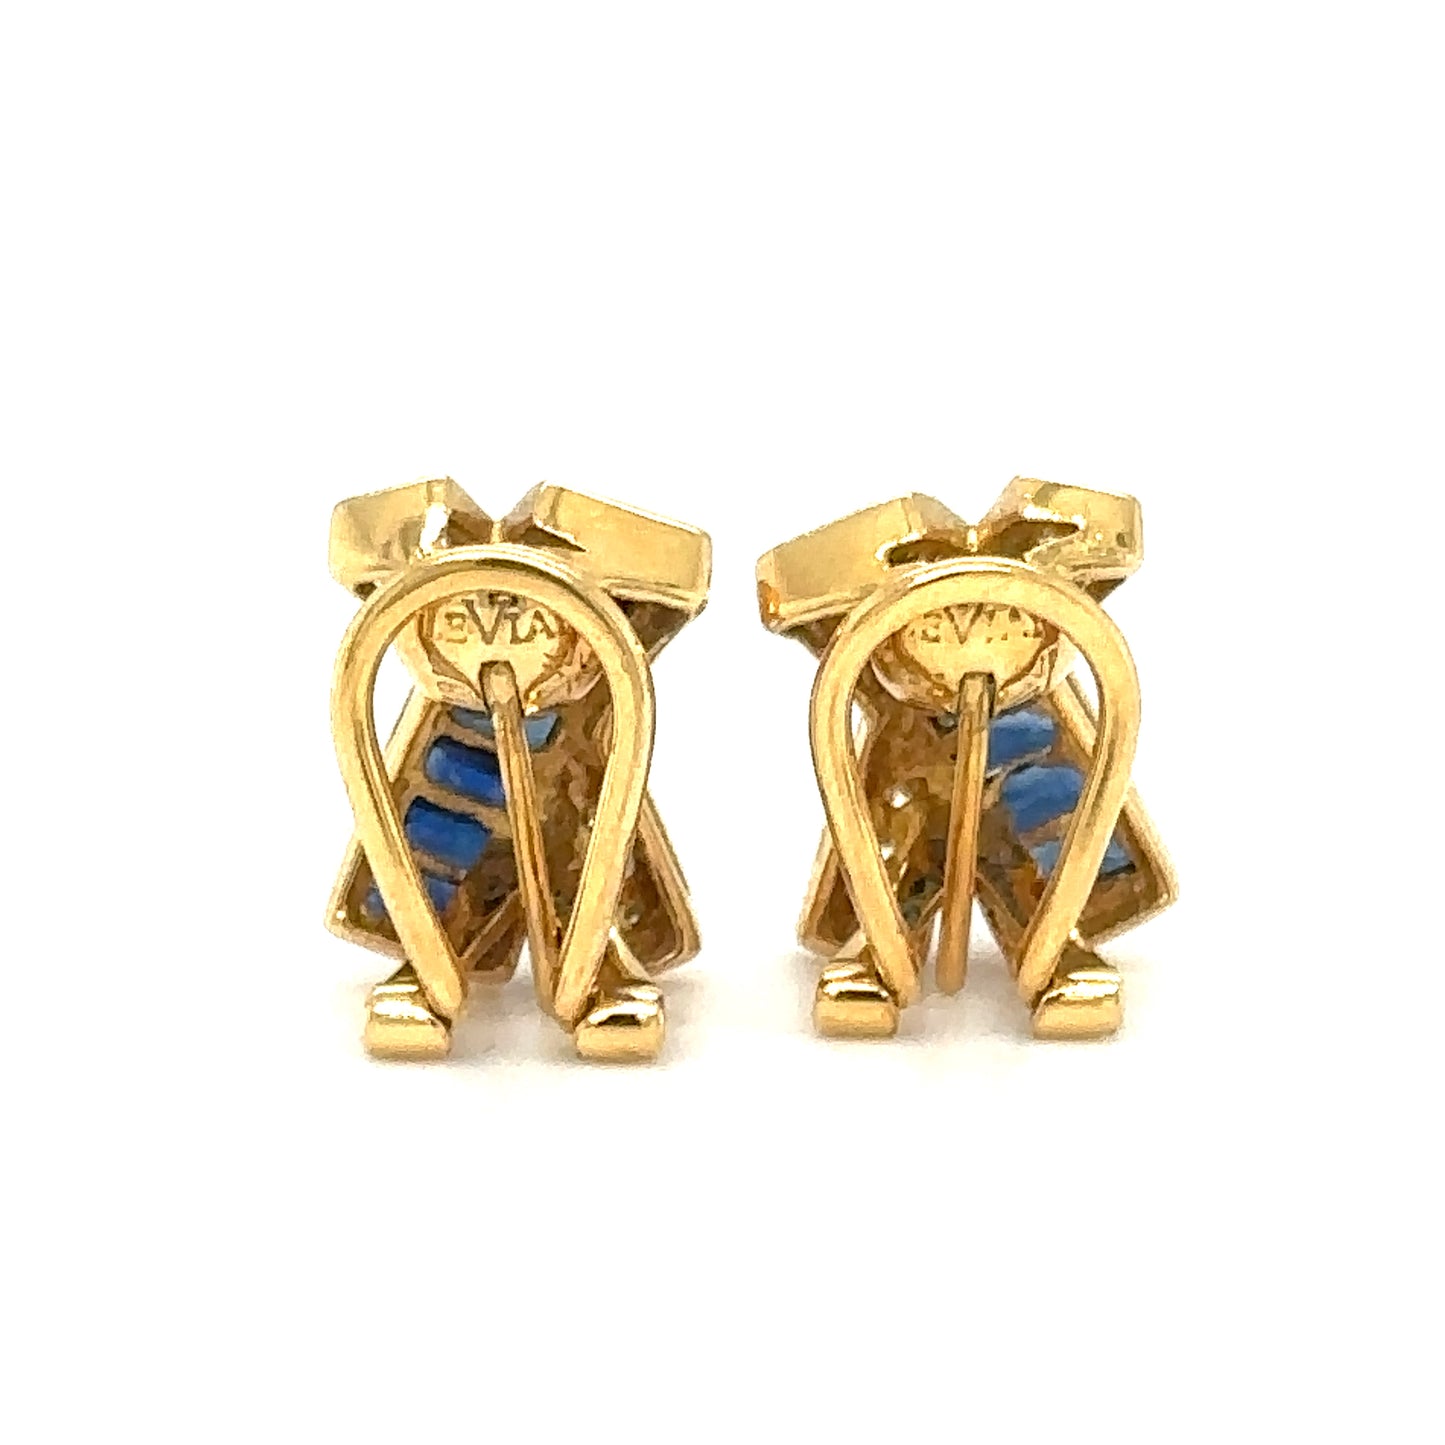 LE VIAN X Style Earrings with Sapphires and Diamonds in 18K Gold